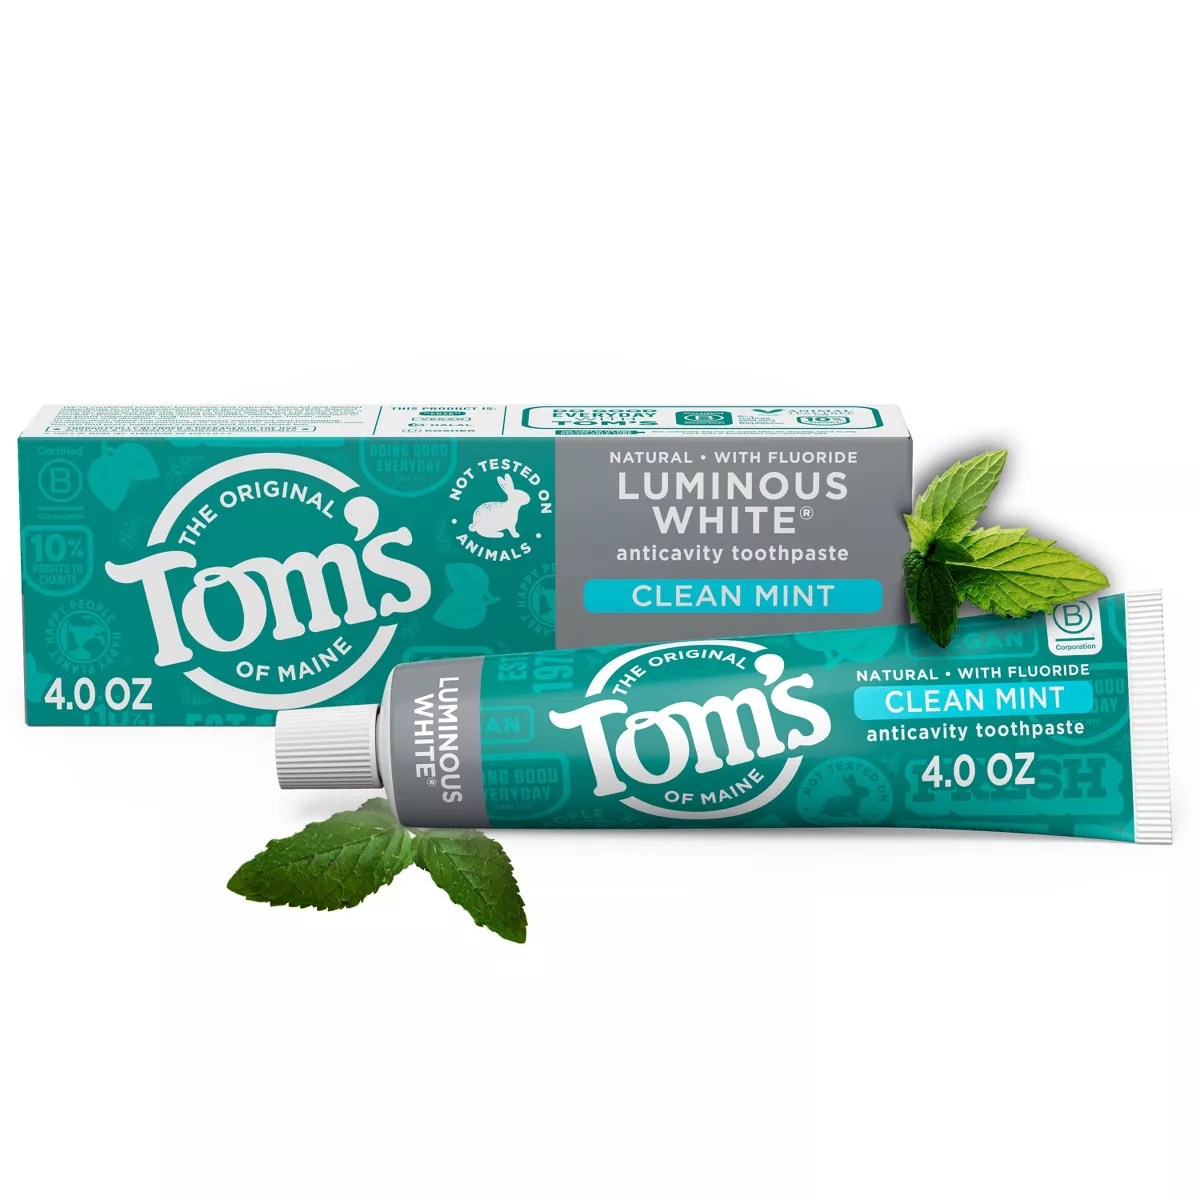 tom's luminous white, one of the best whitening toothpastes